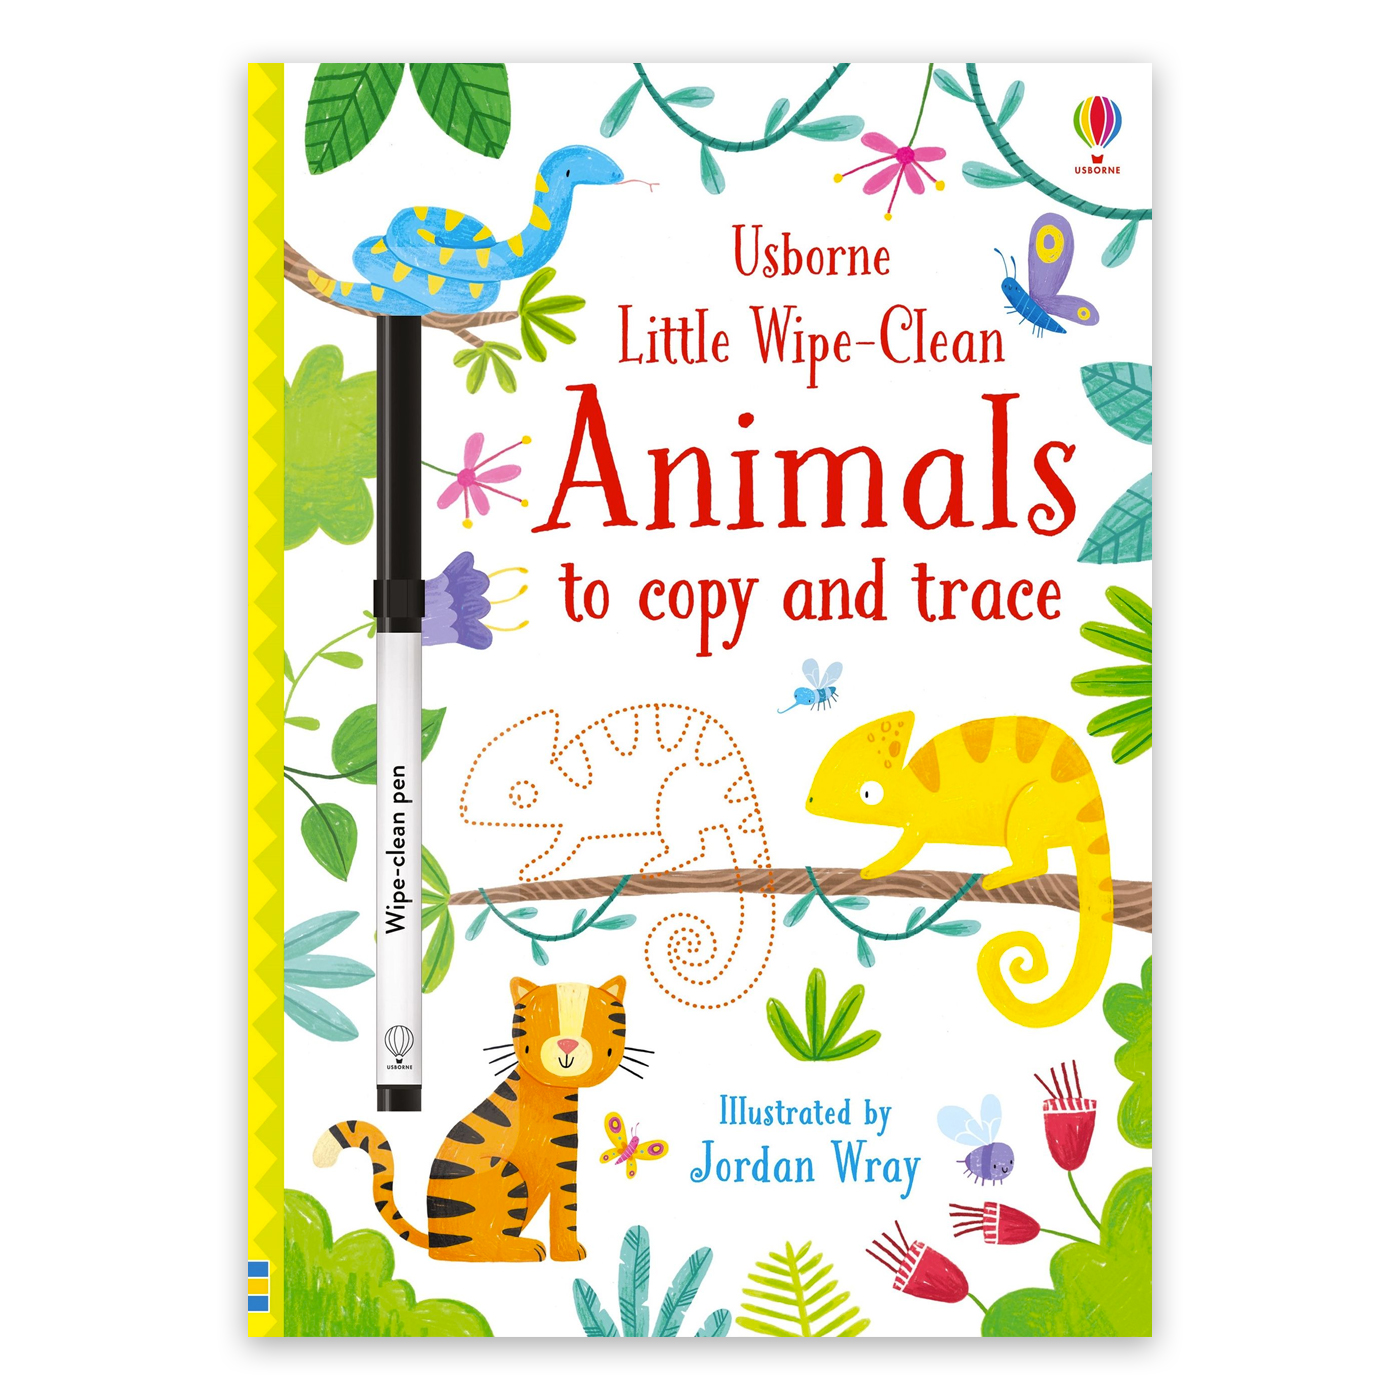  Little Wipe-Clean Animals to copy and trace